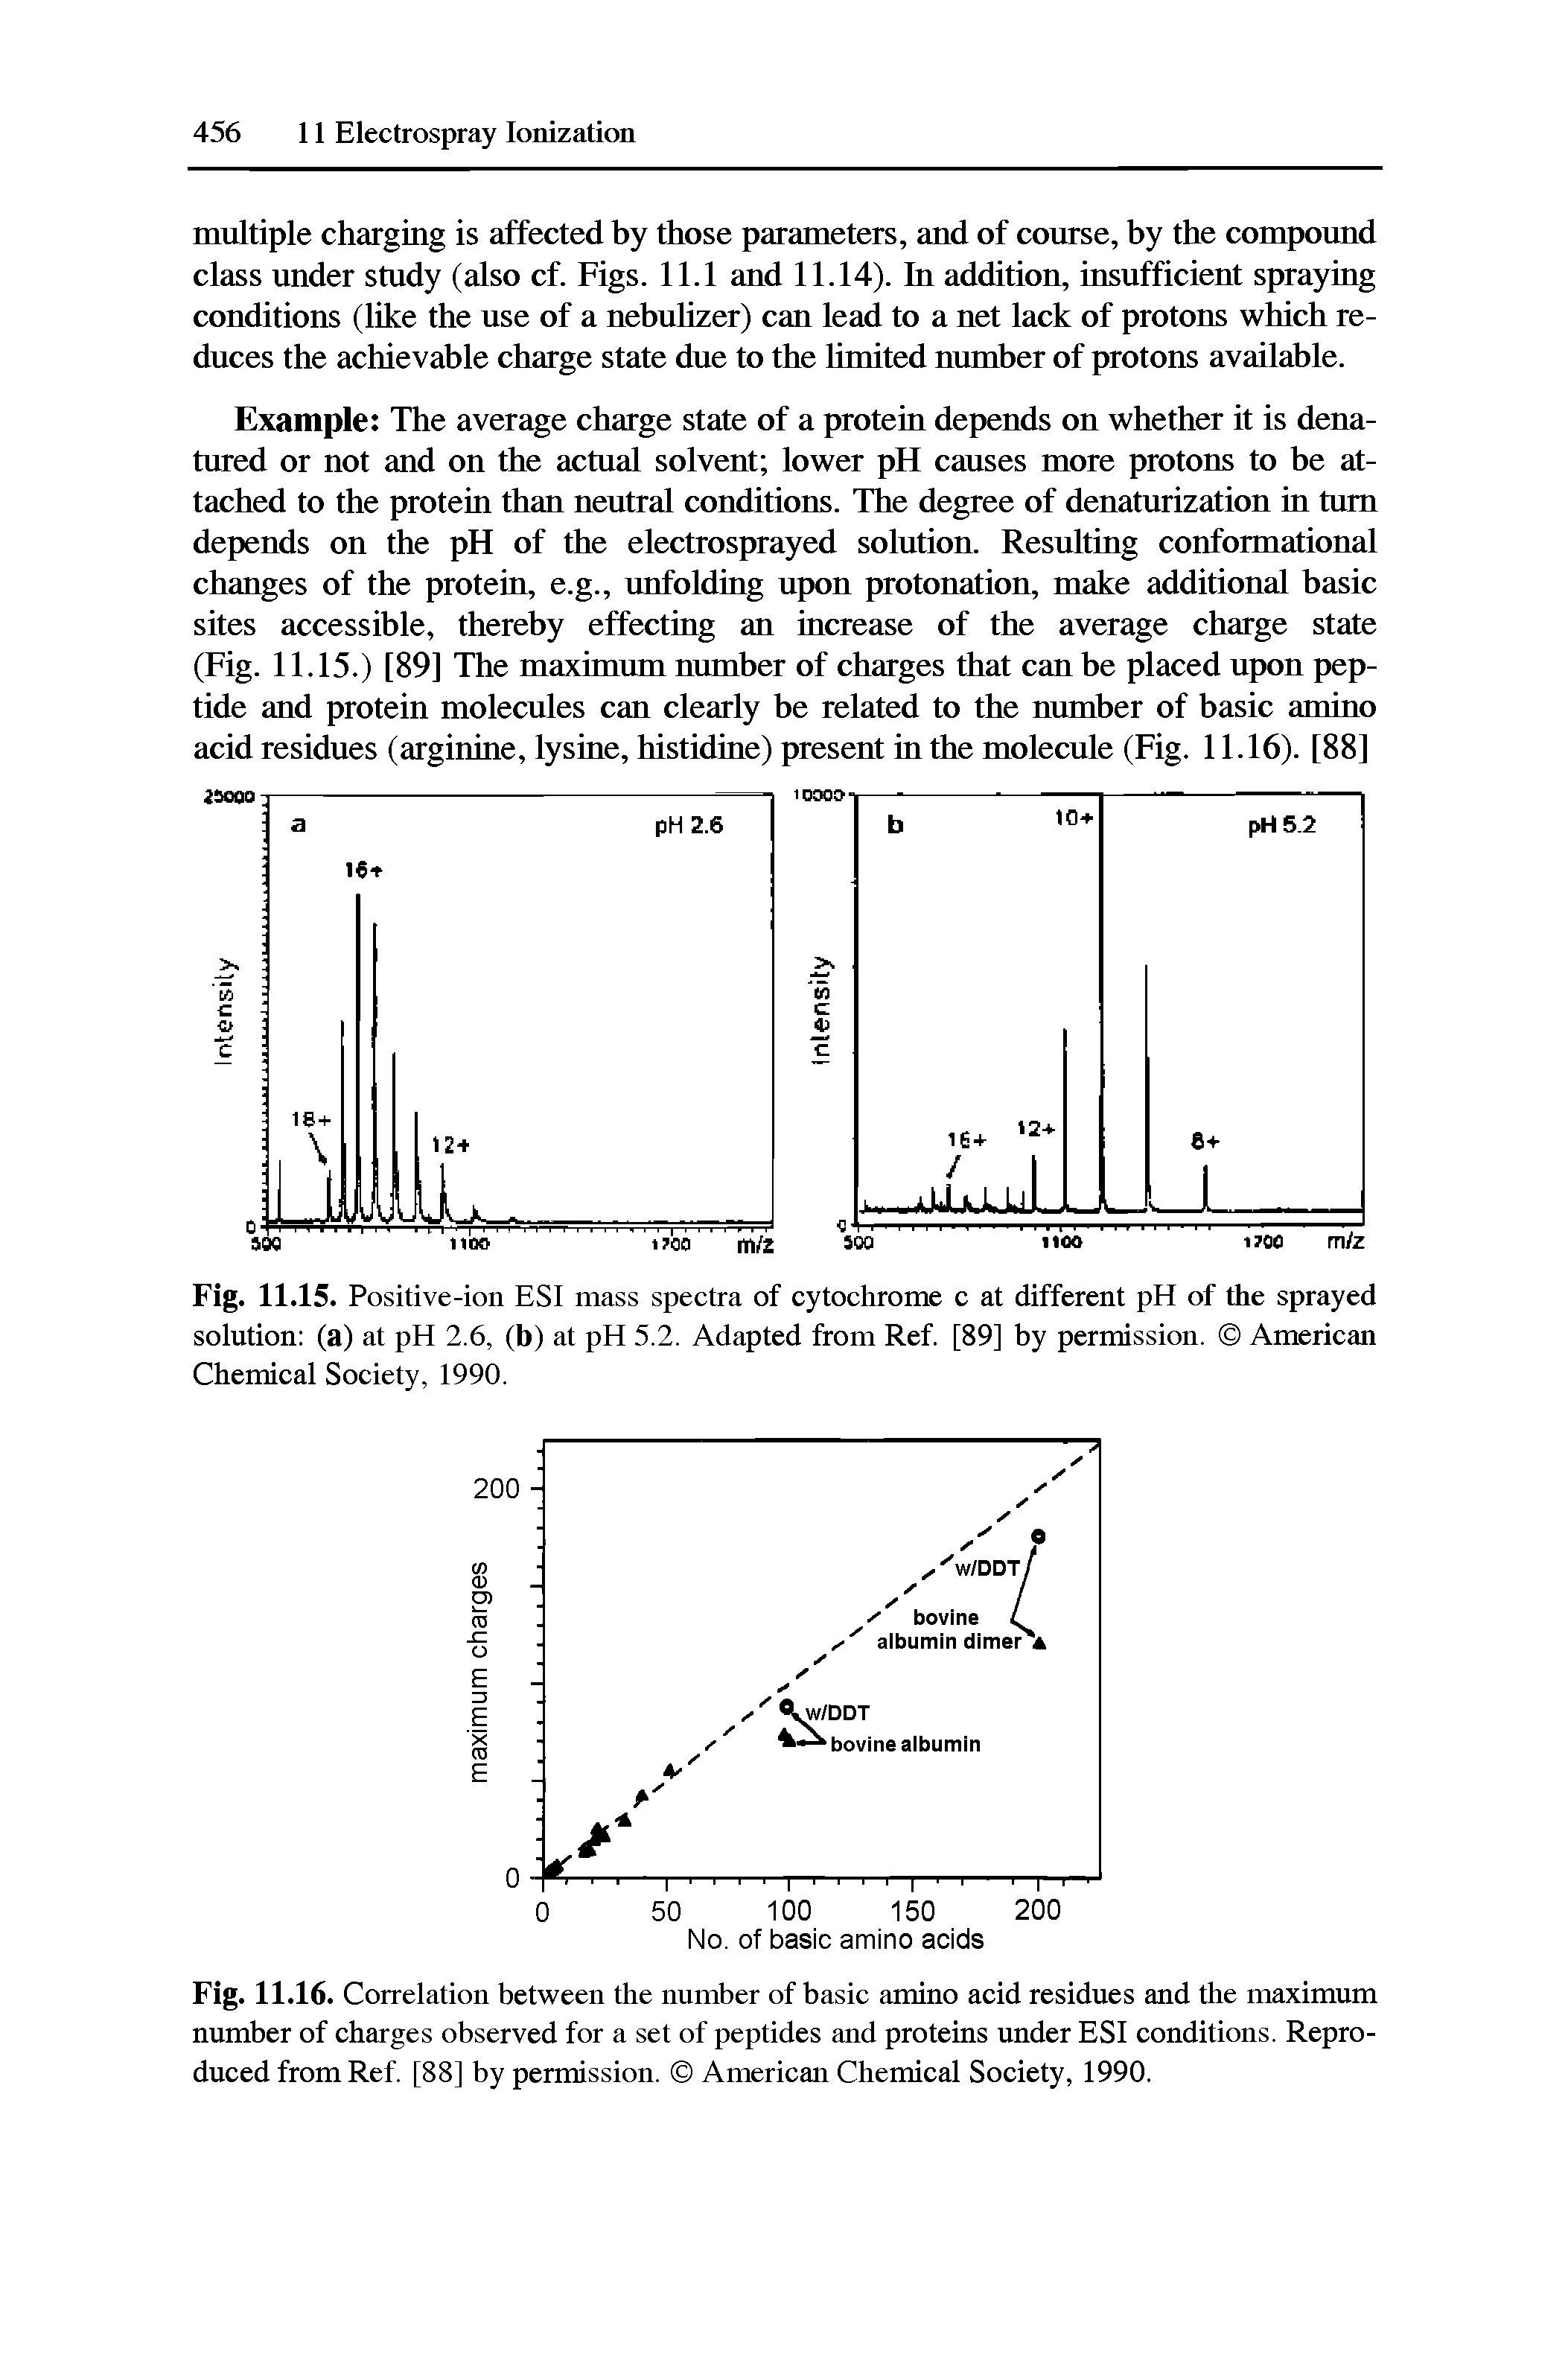 Fig. 11.15. Positive-ion ESI mass spectra of cytochrome c at different pH of the sprayed solution (a) at pH 2.6, (b) at pH 5.2. Adapted from Ref. [89] by permission. American Chemical Society, 1990.